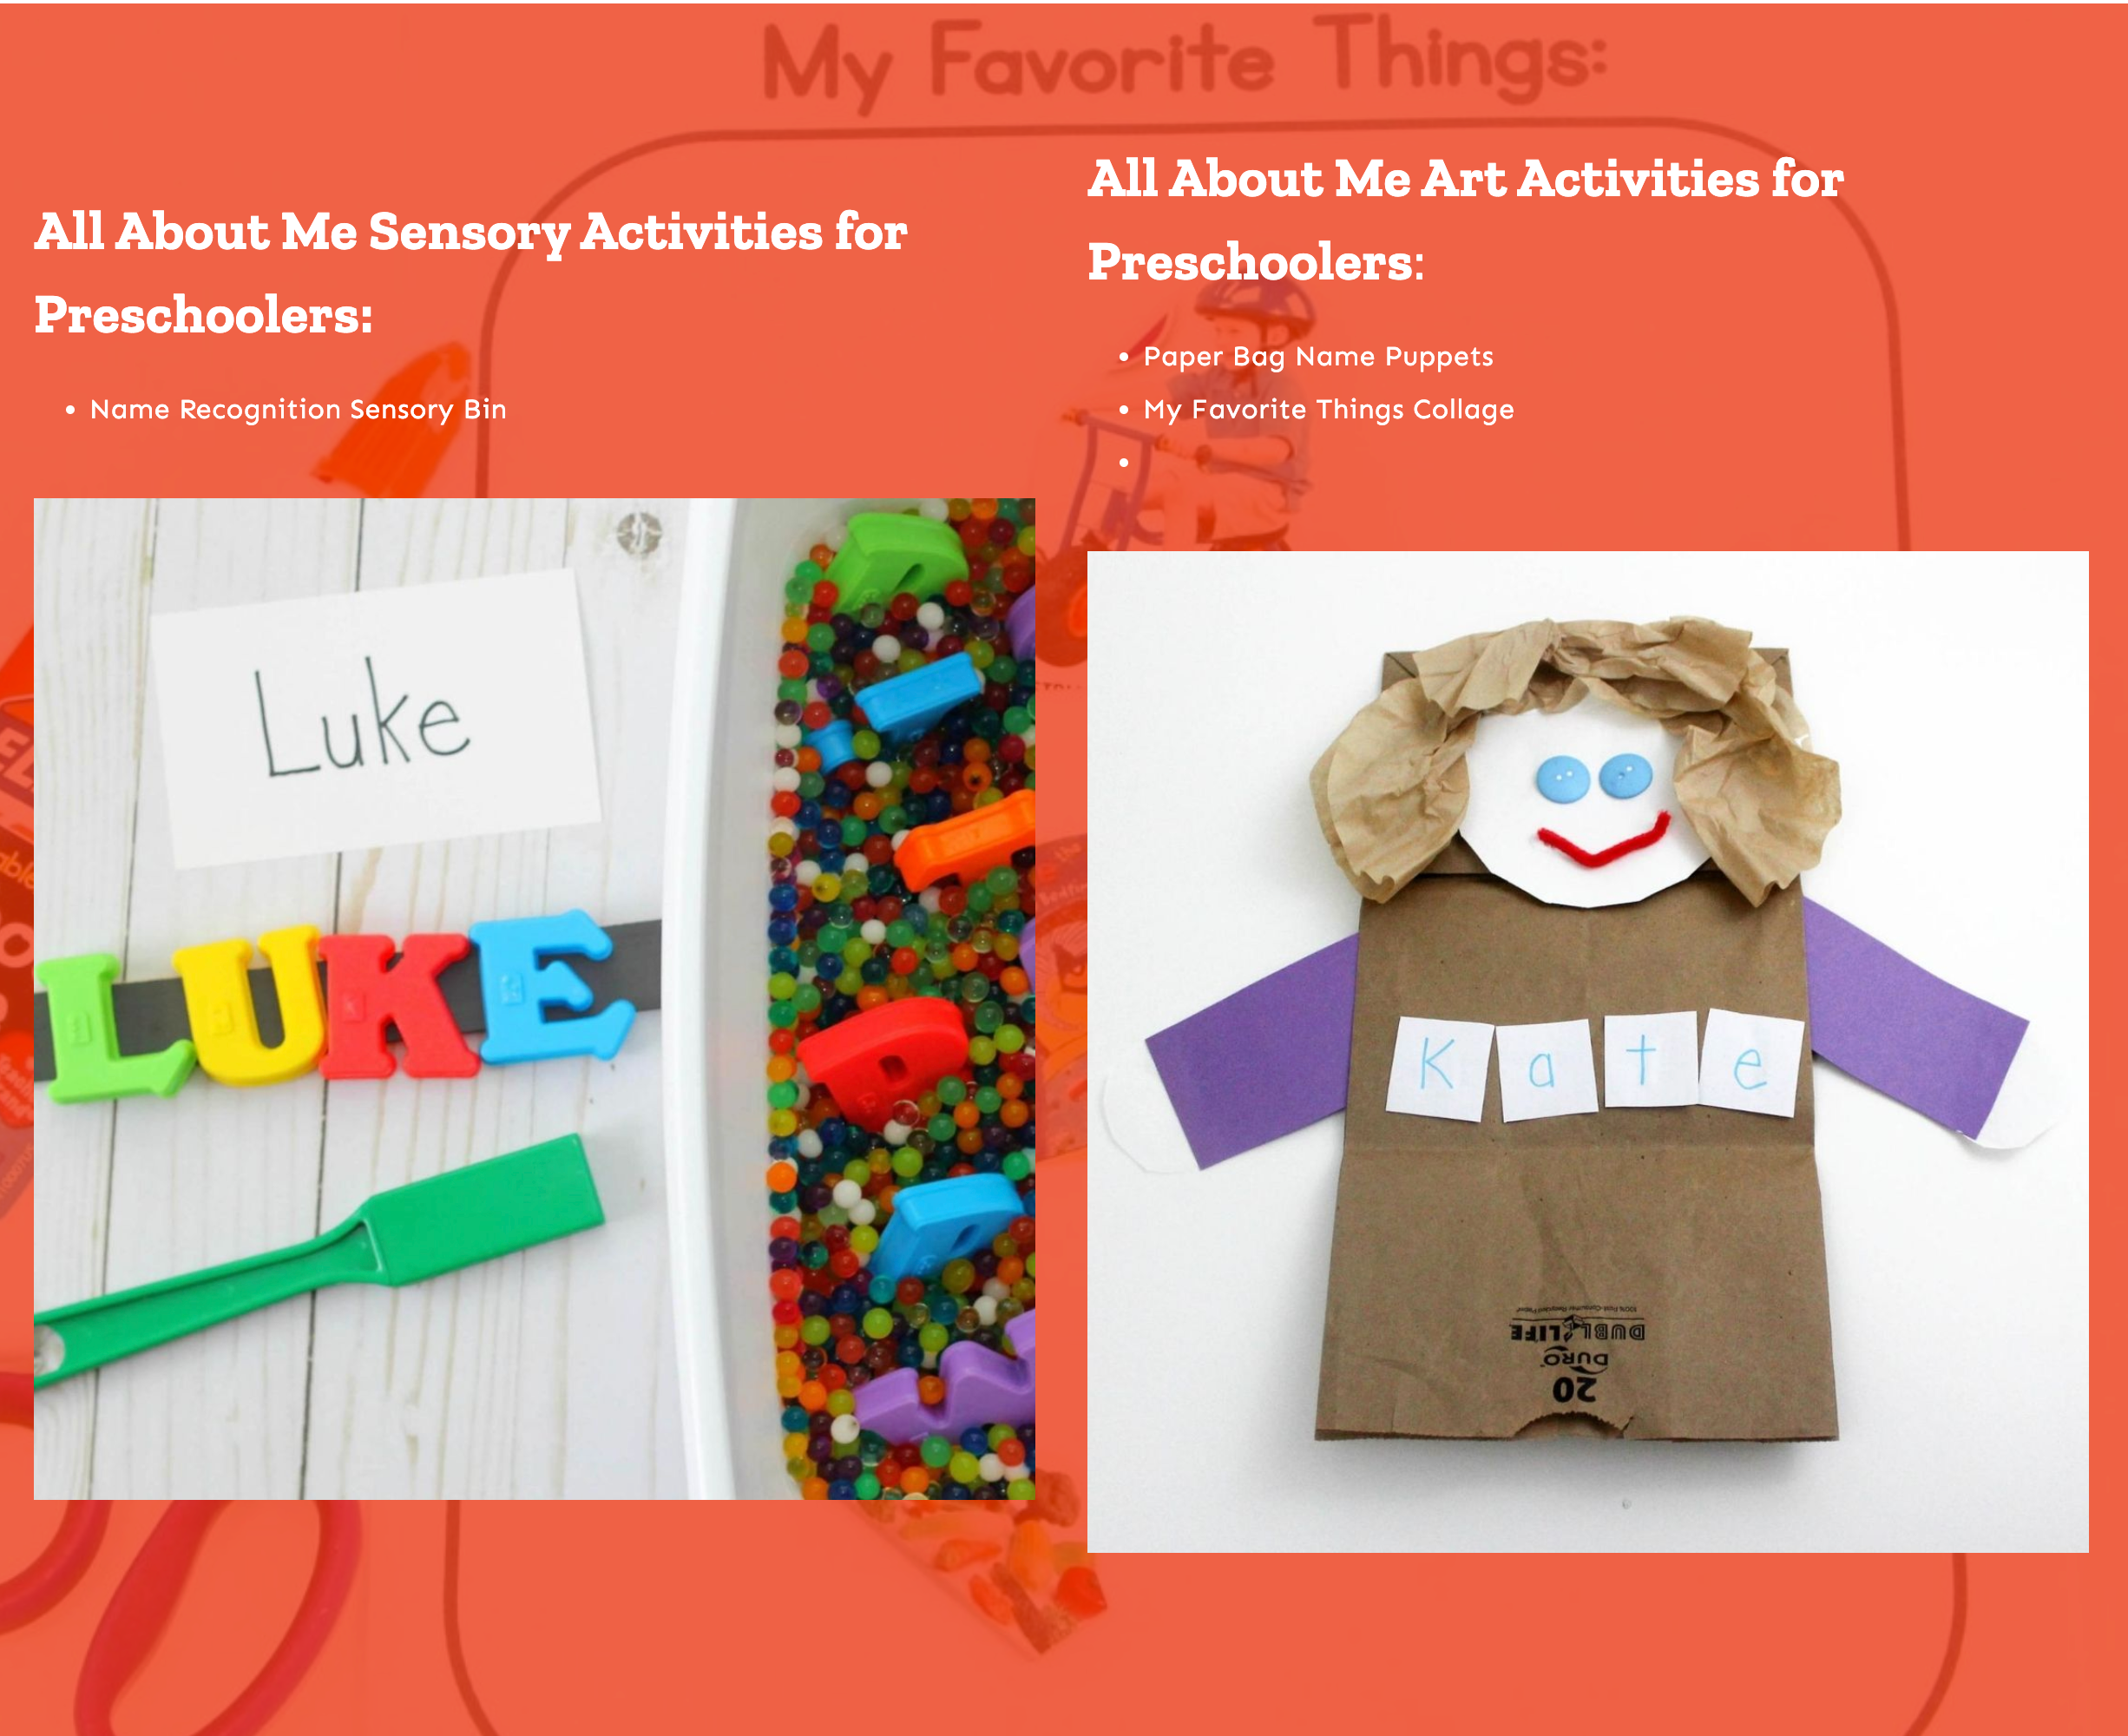 list of all about me sensory activities and art projects for preschoolers